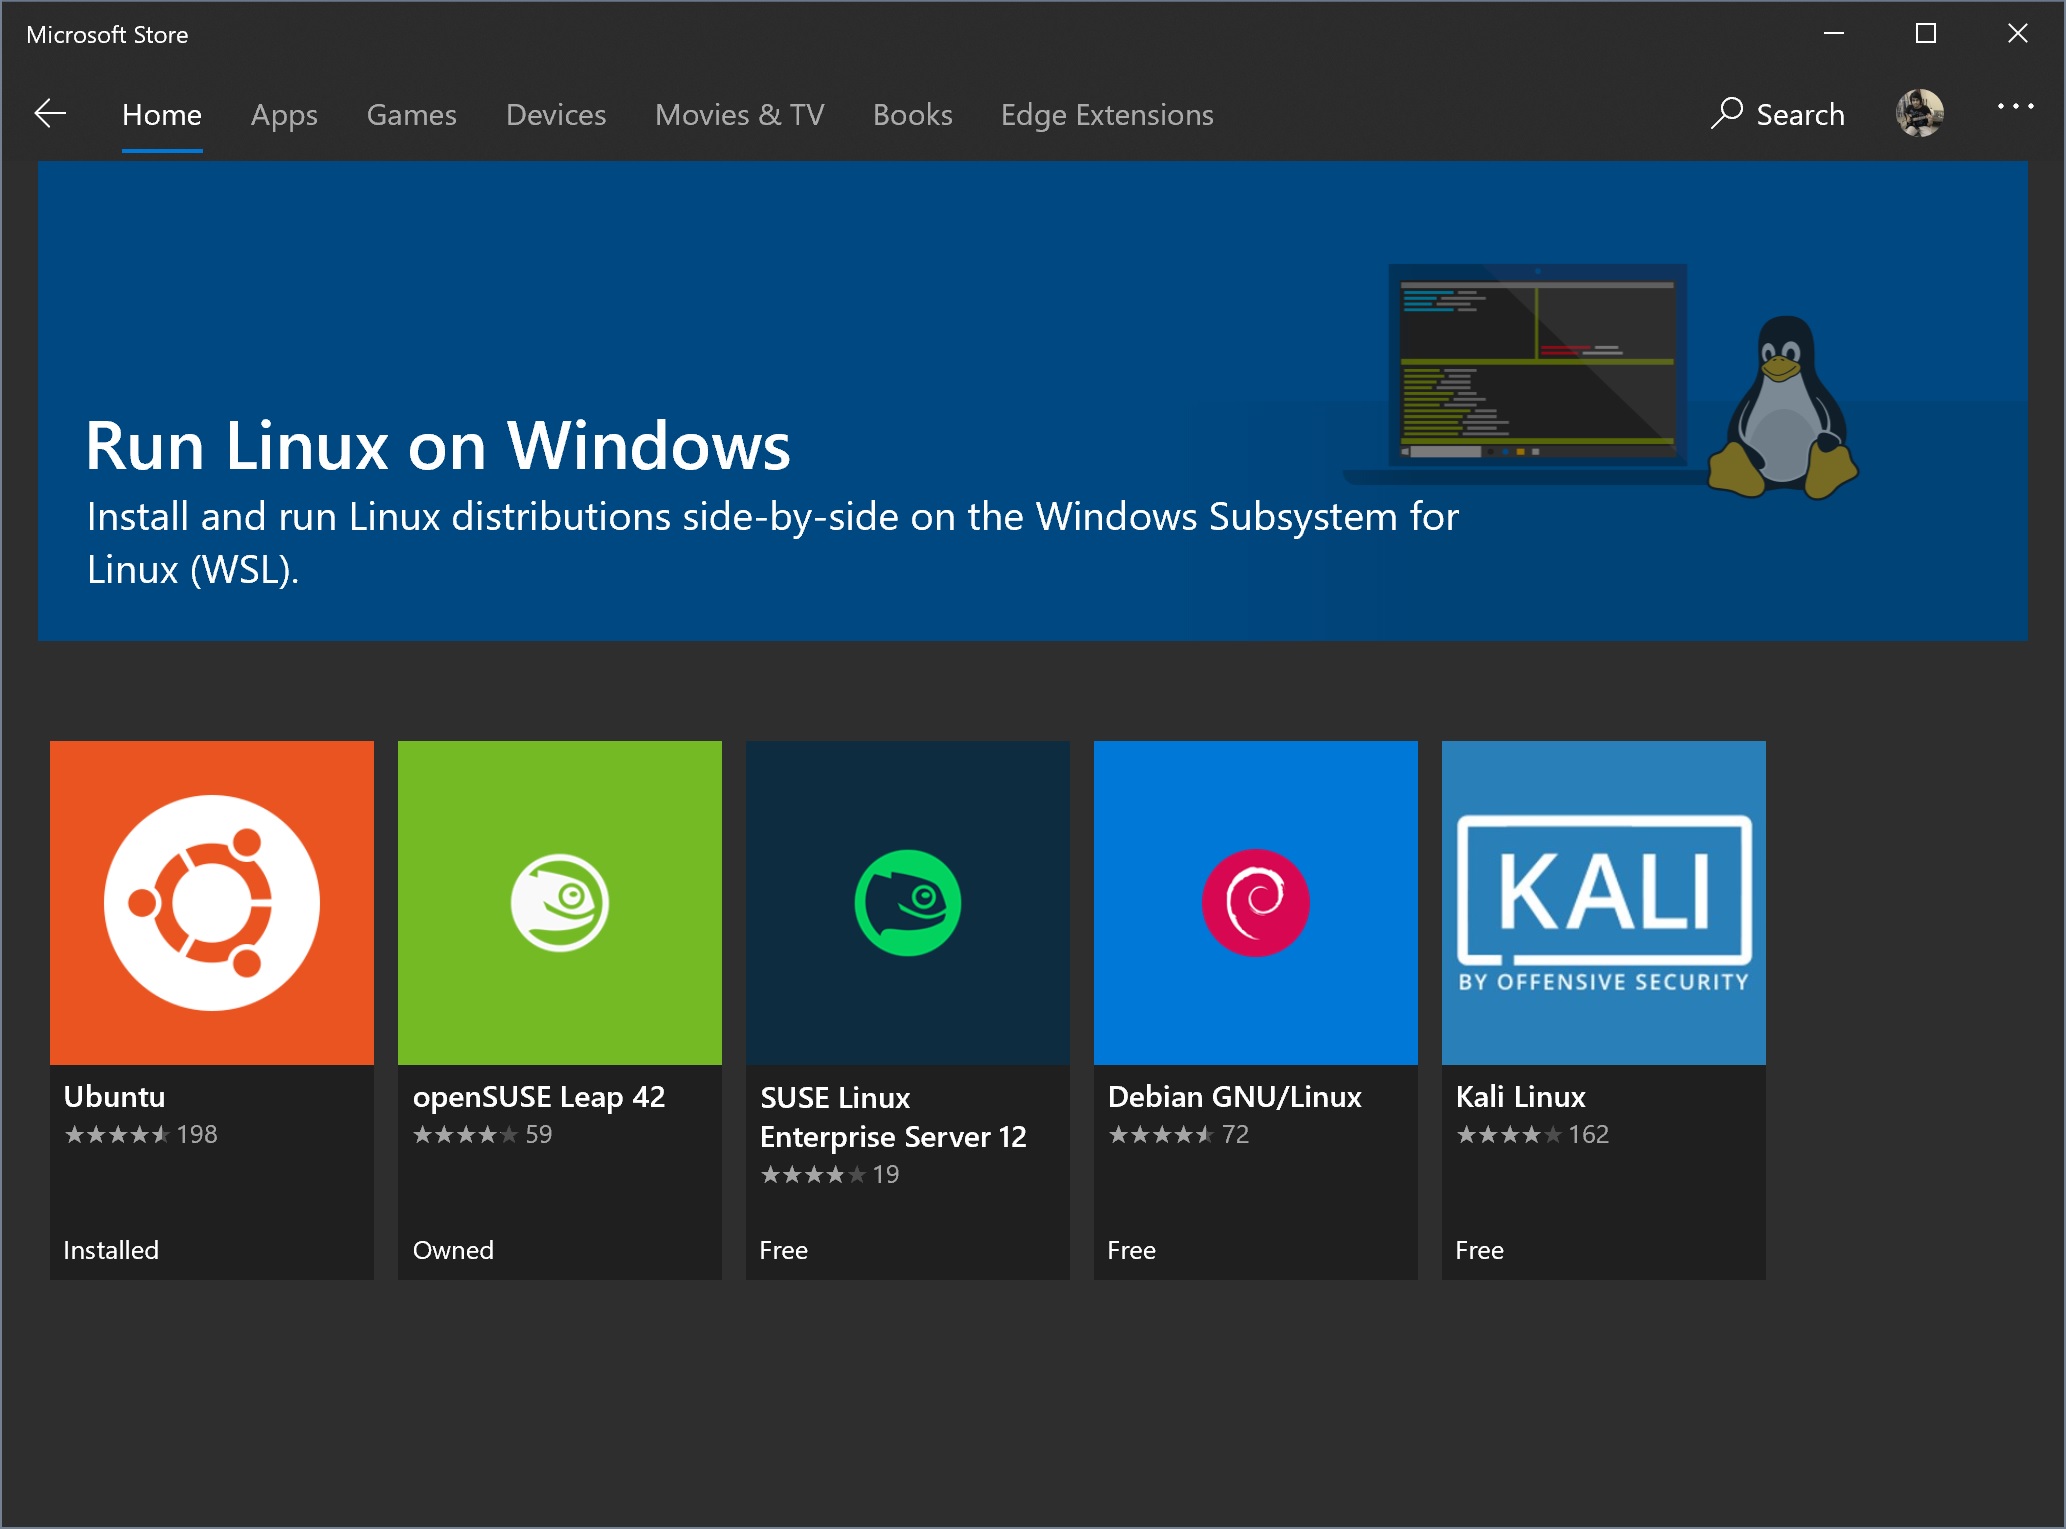 Linux distros available in the Microsoft Store!